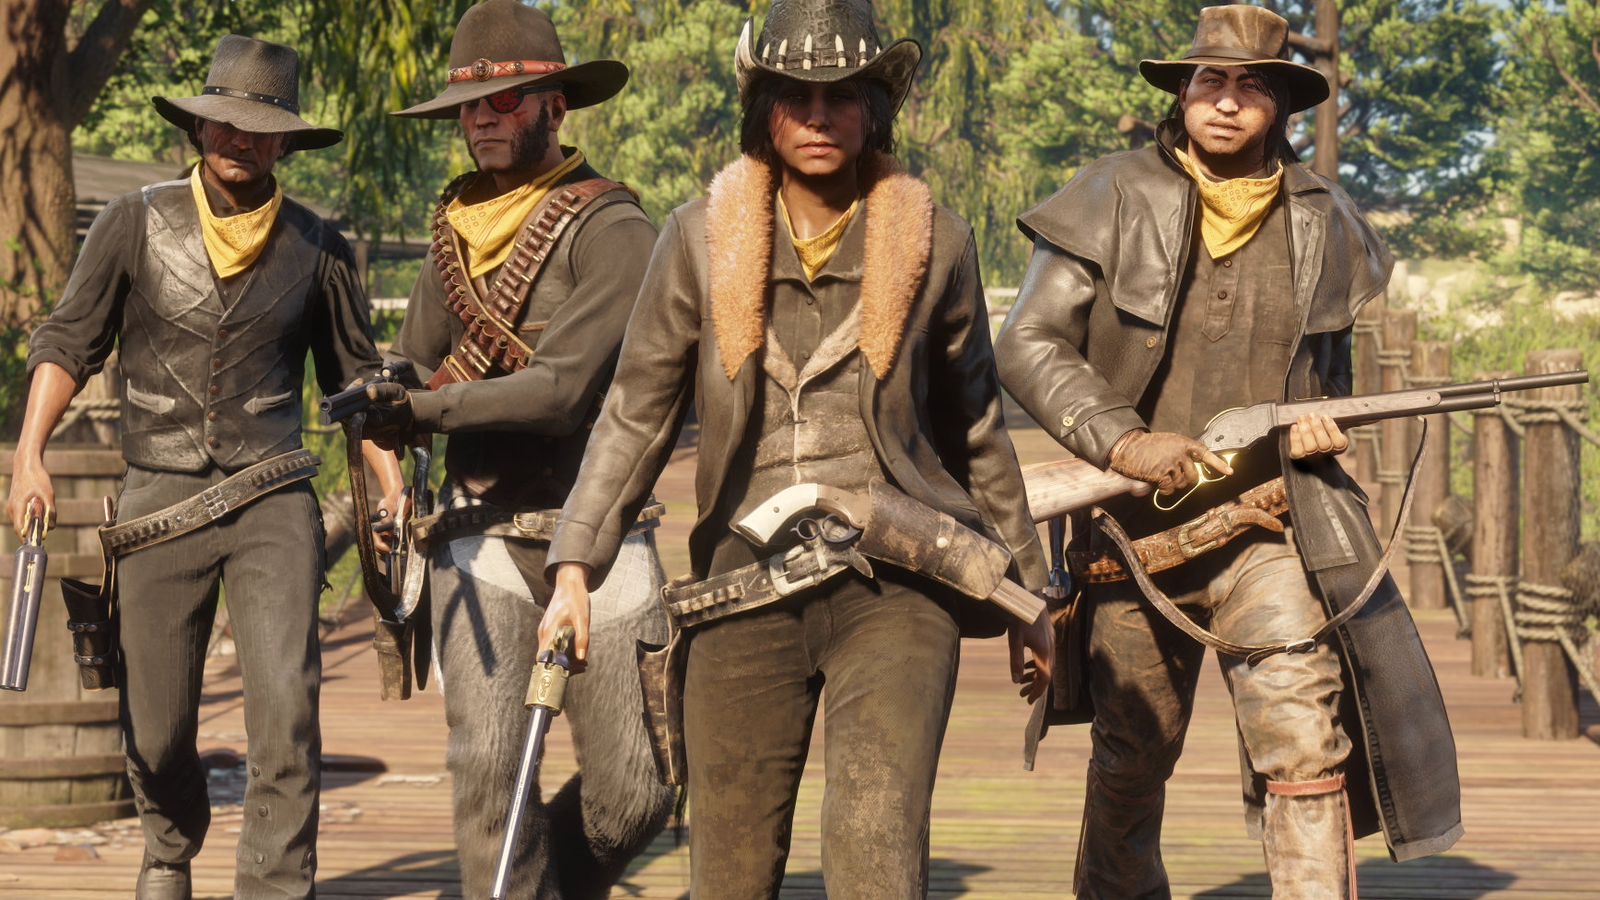 What's Most Interesting About 'Red Dead Redemption 2' Game From 'GTA' Maker